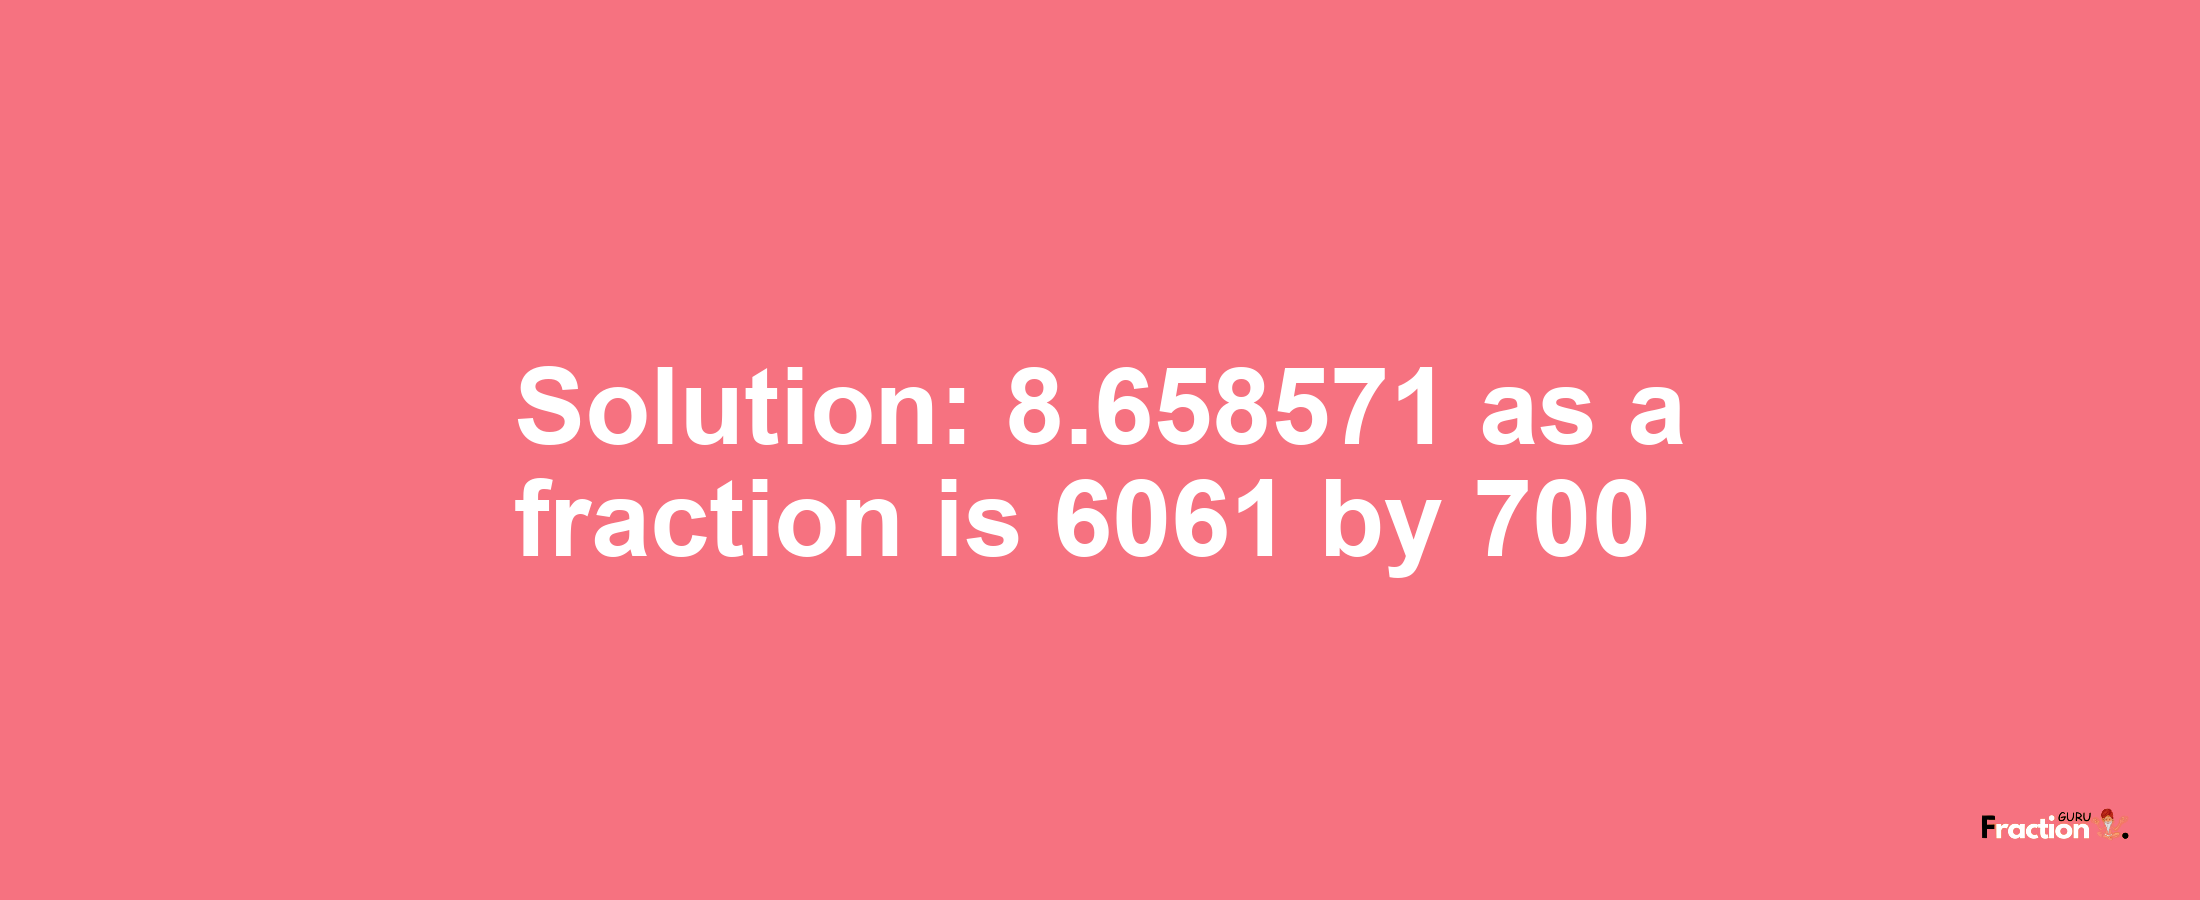 Solution:8.658571 as a fraction is 6061/700